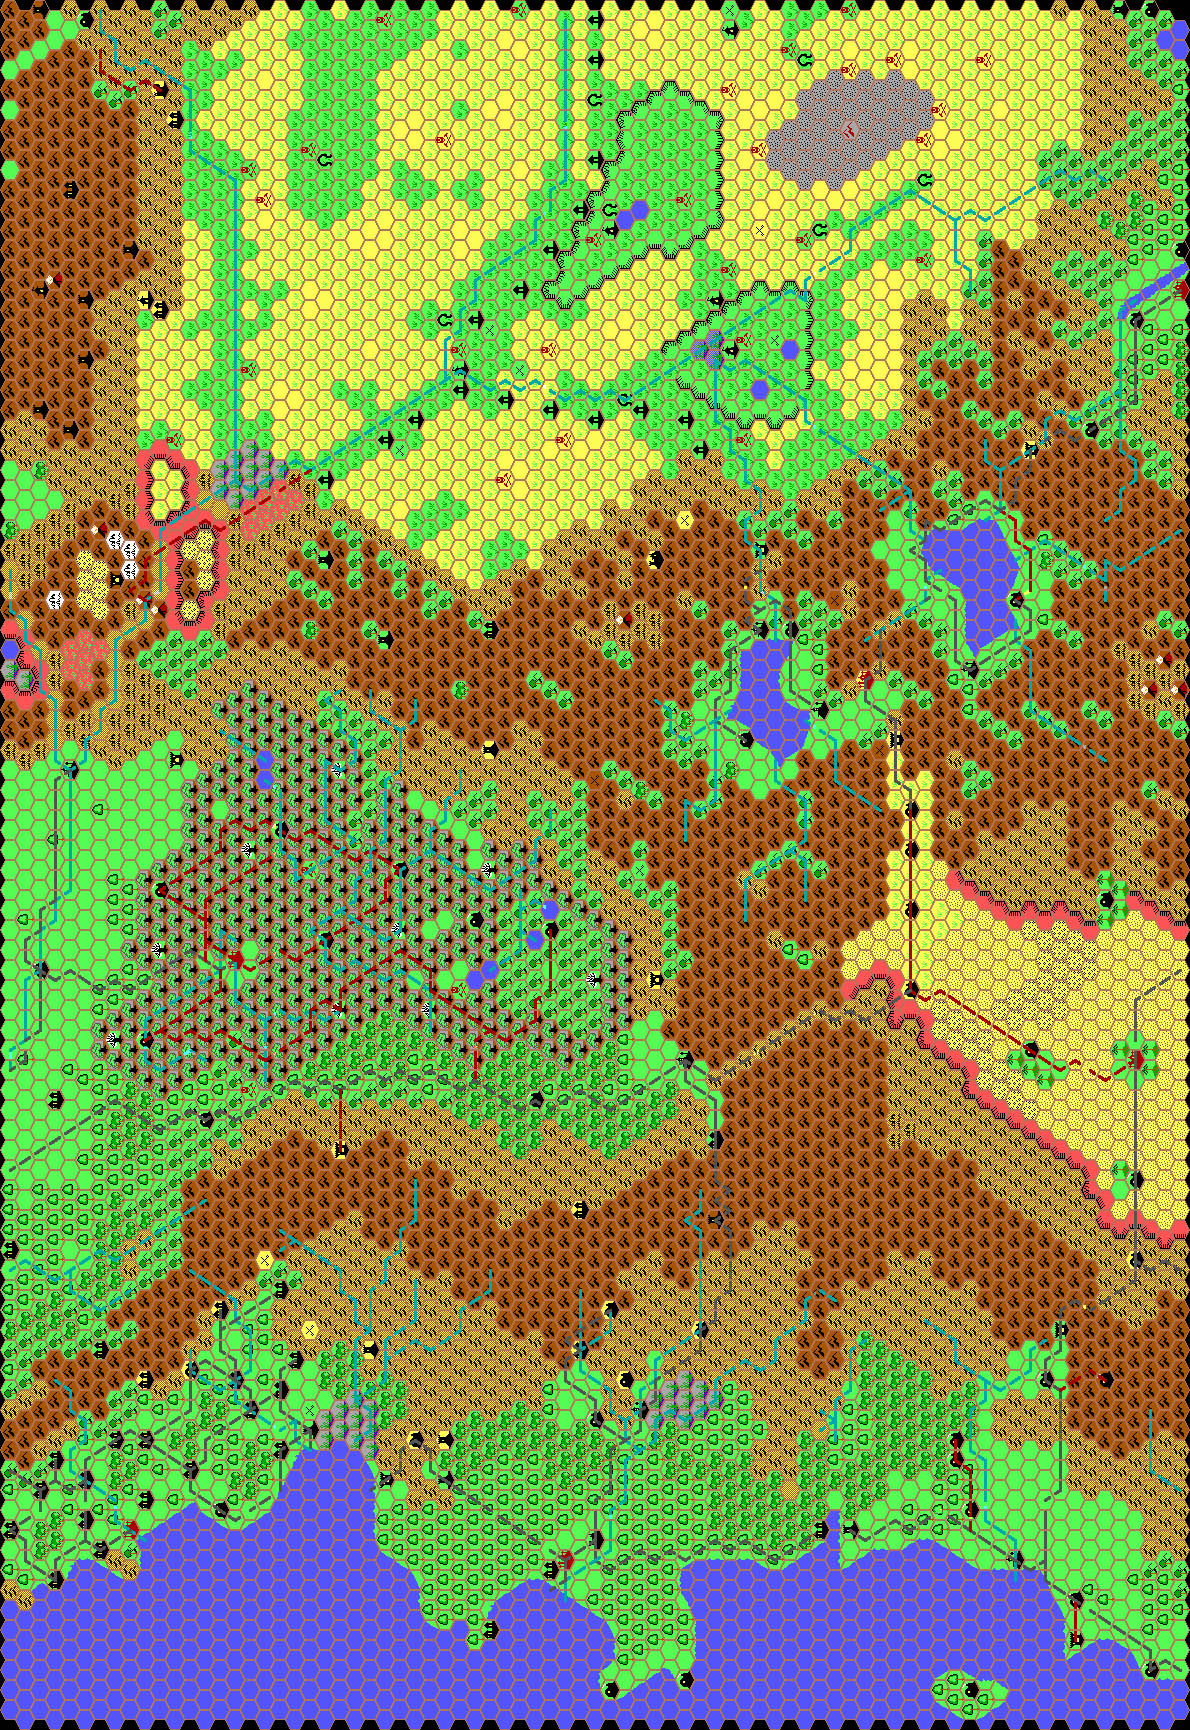 Work-in-progress map of a section of the Known World, 8 miles per hex by Thibault Sarlat, August 1999